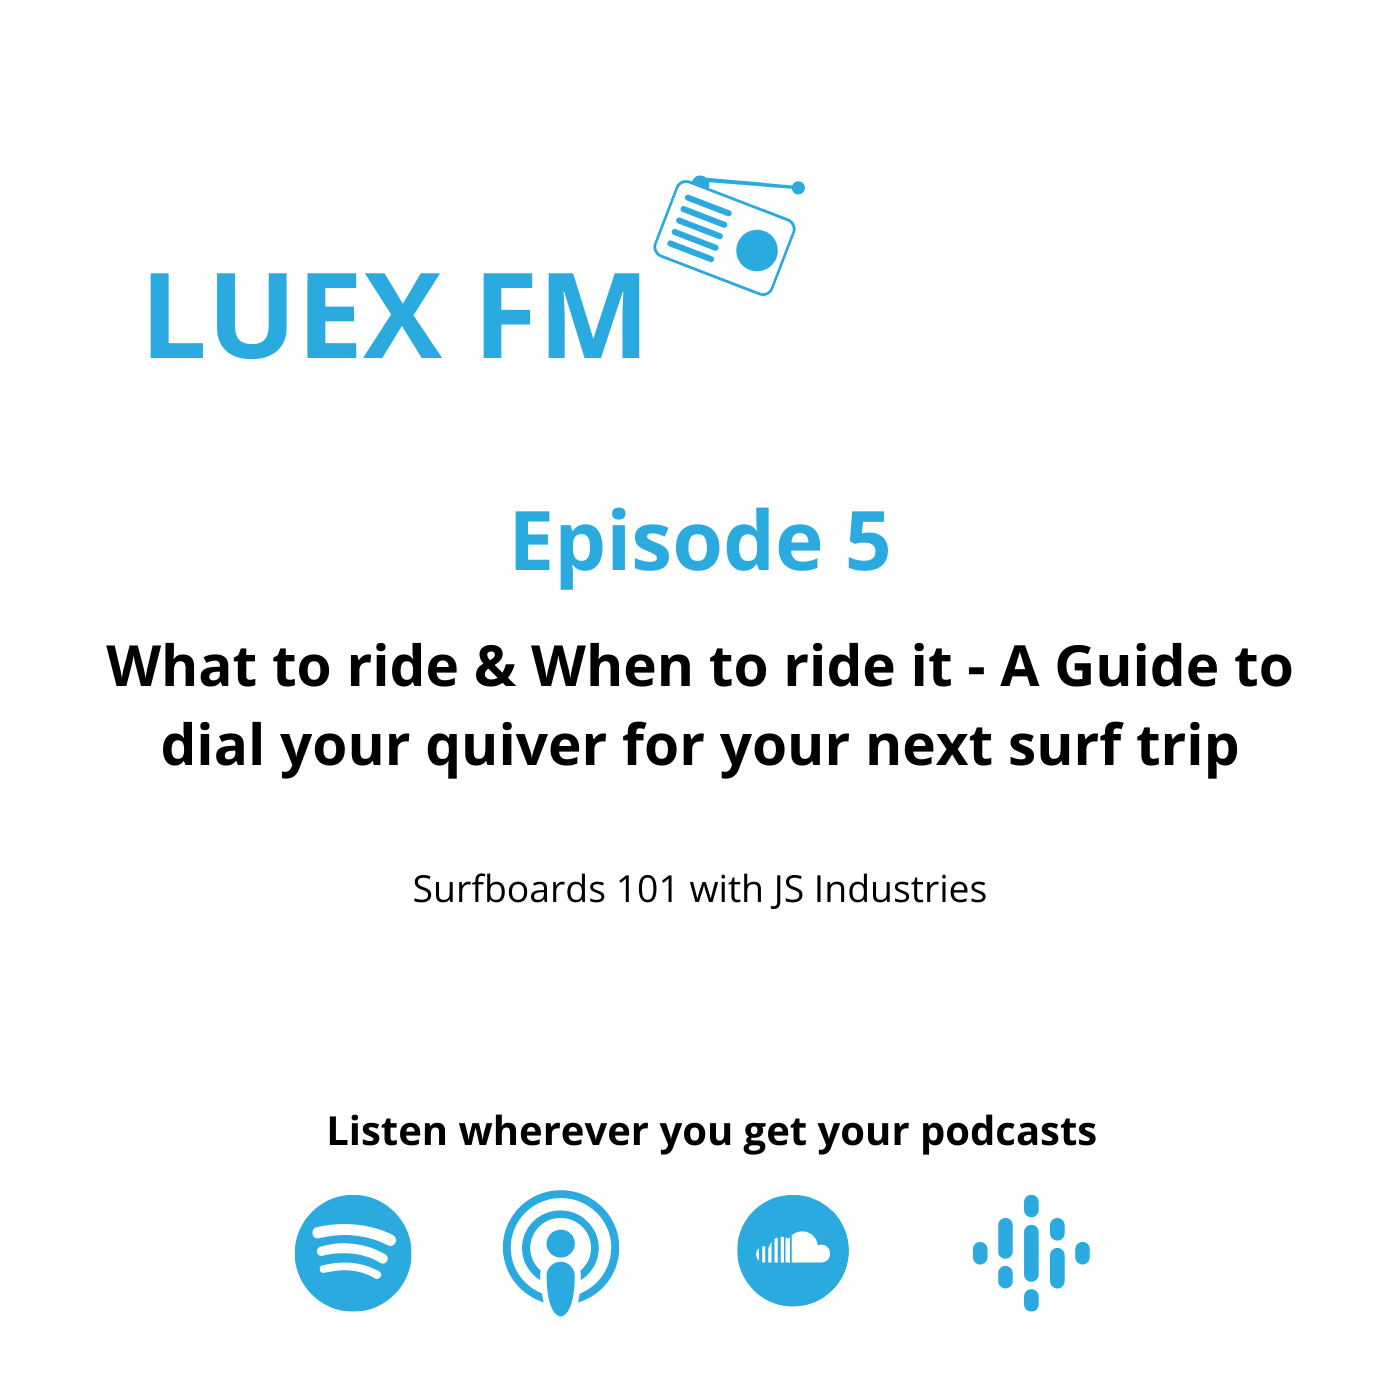 Episode 5 | What to ride & When to ride it - A Guide to dial your quiver for your next surf trip